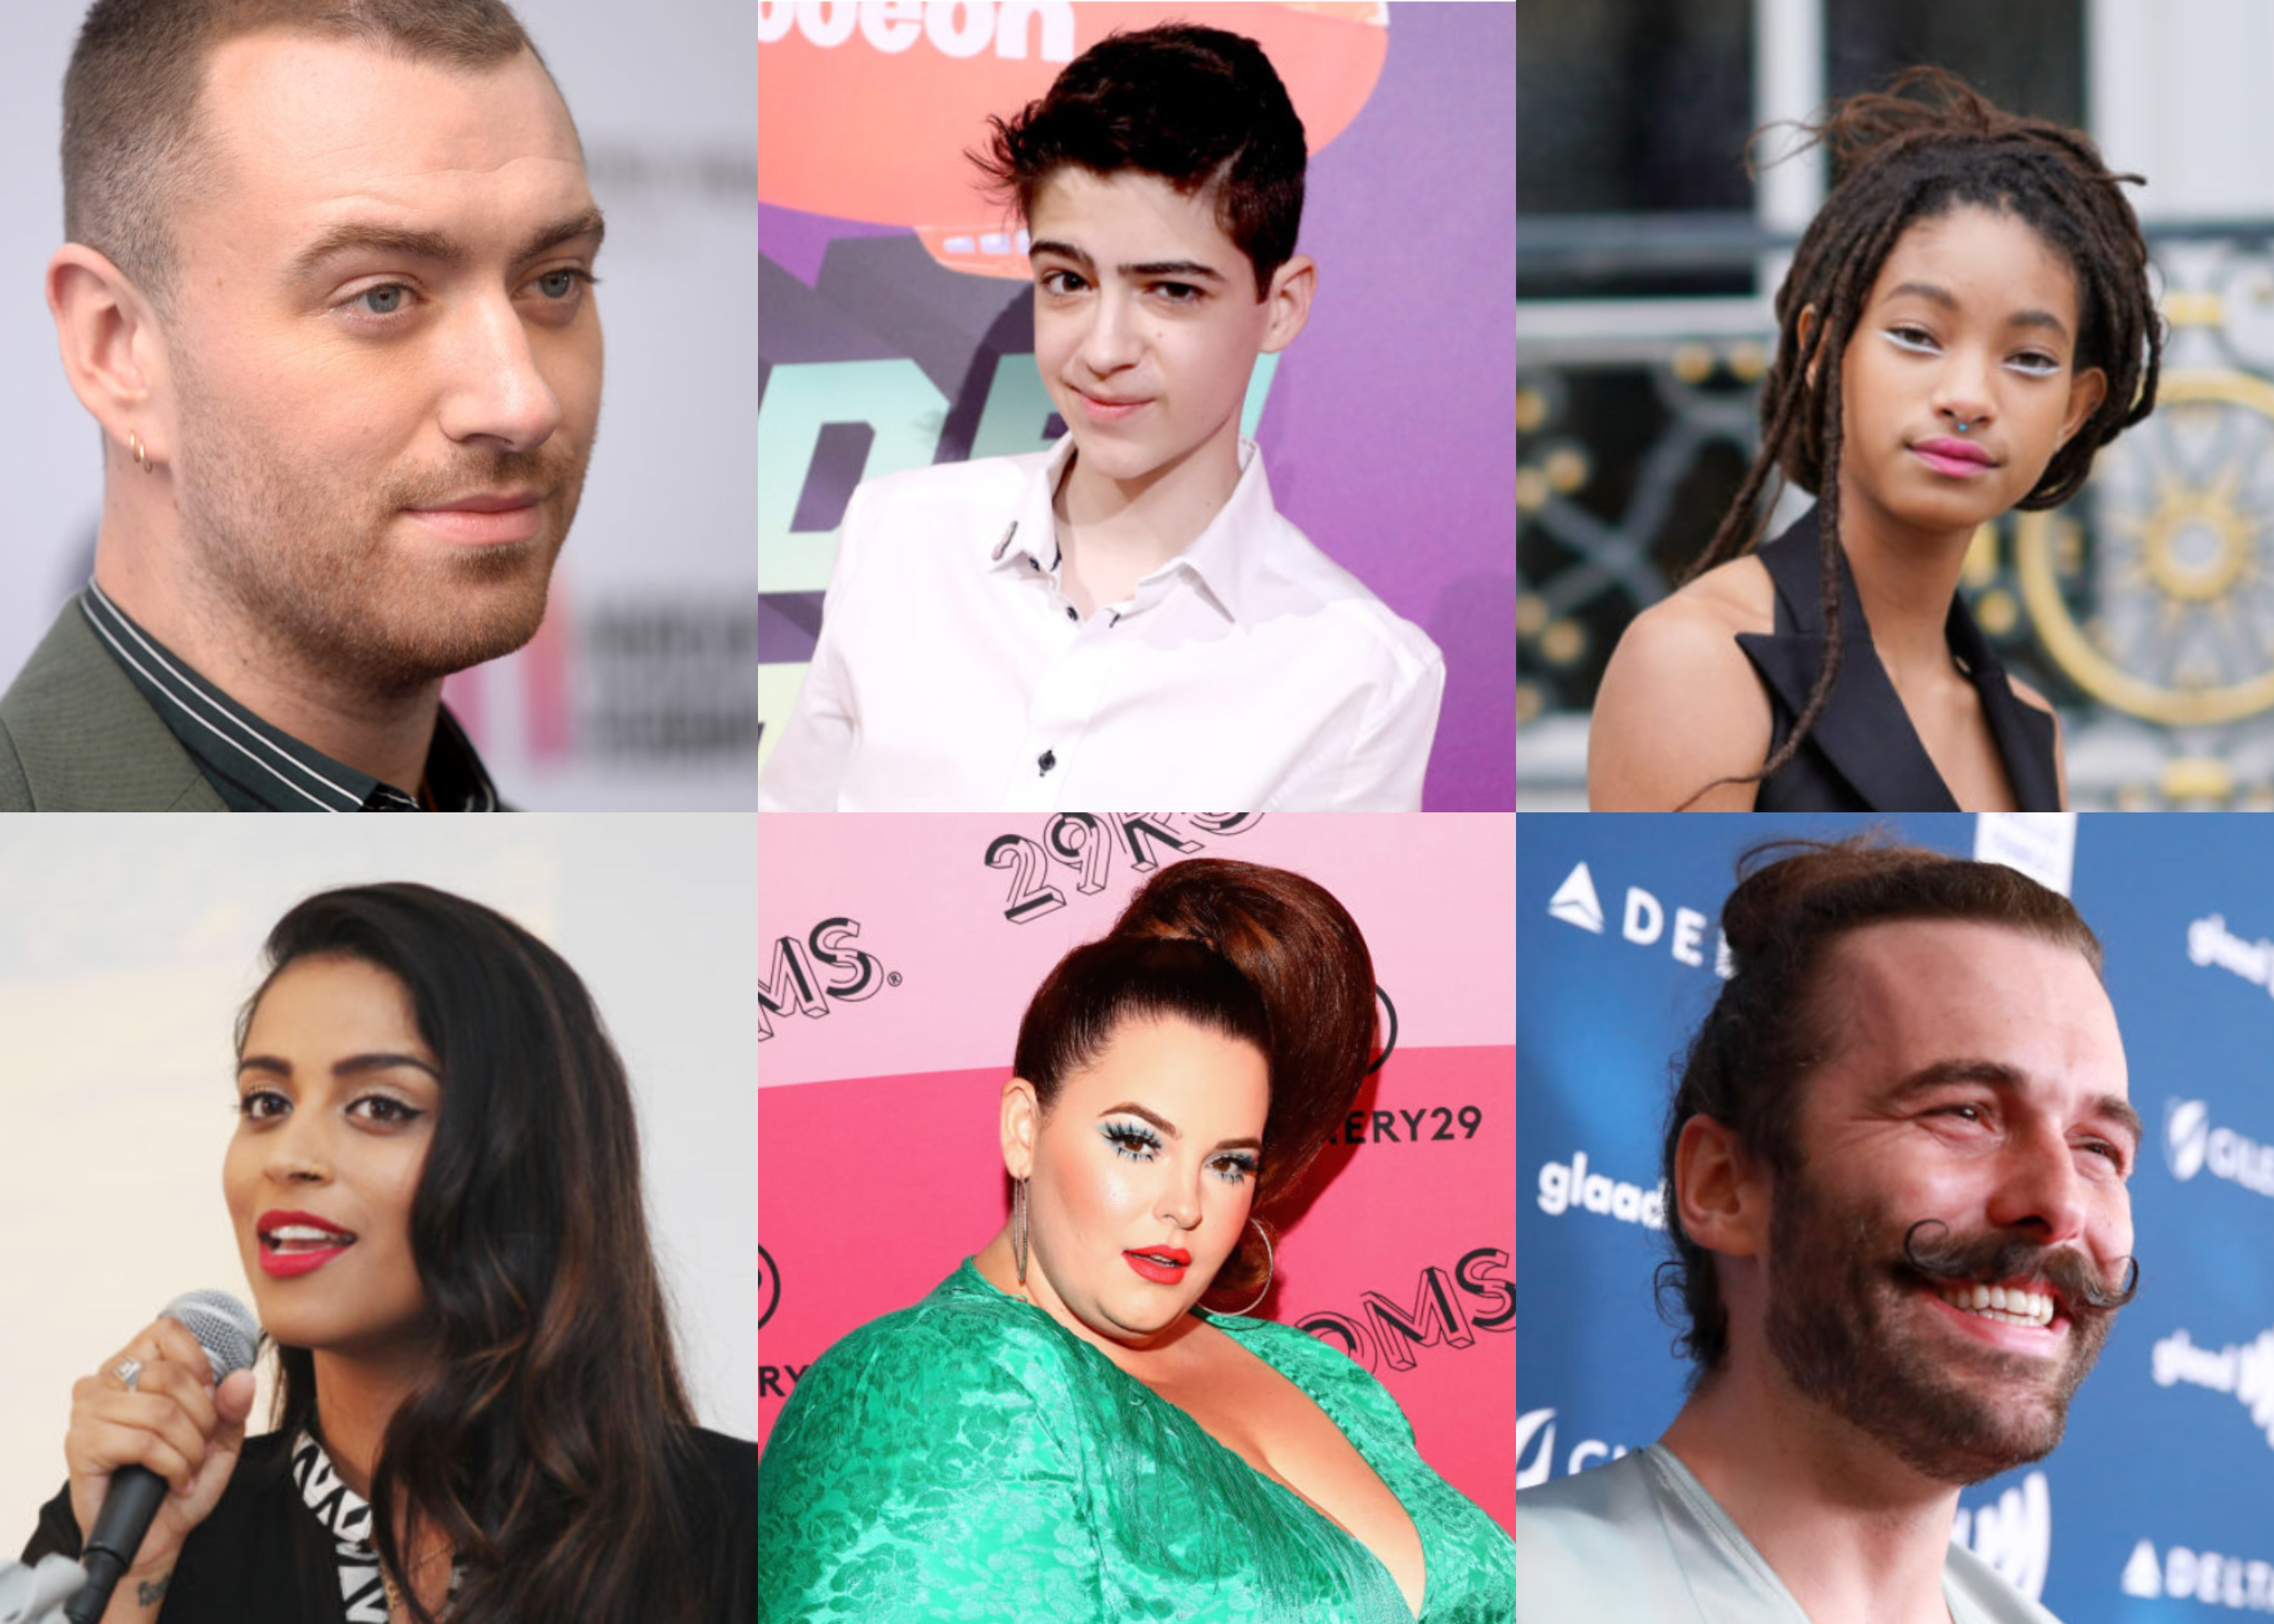 17 of the biggest and most influential coming out stories of 2019 | PinkNews